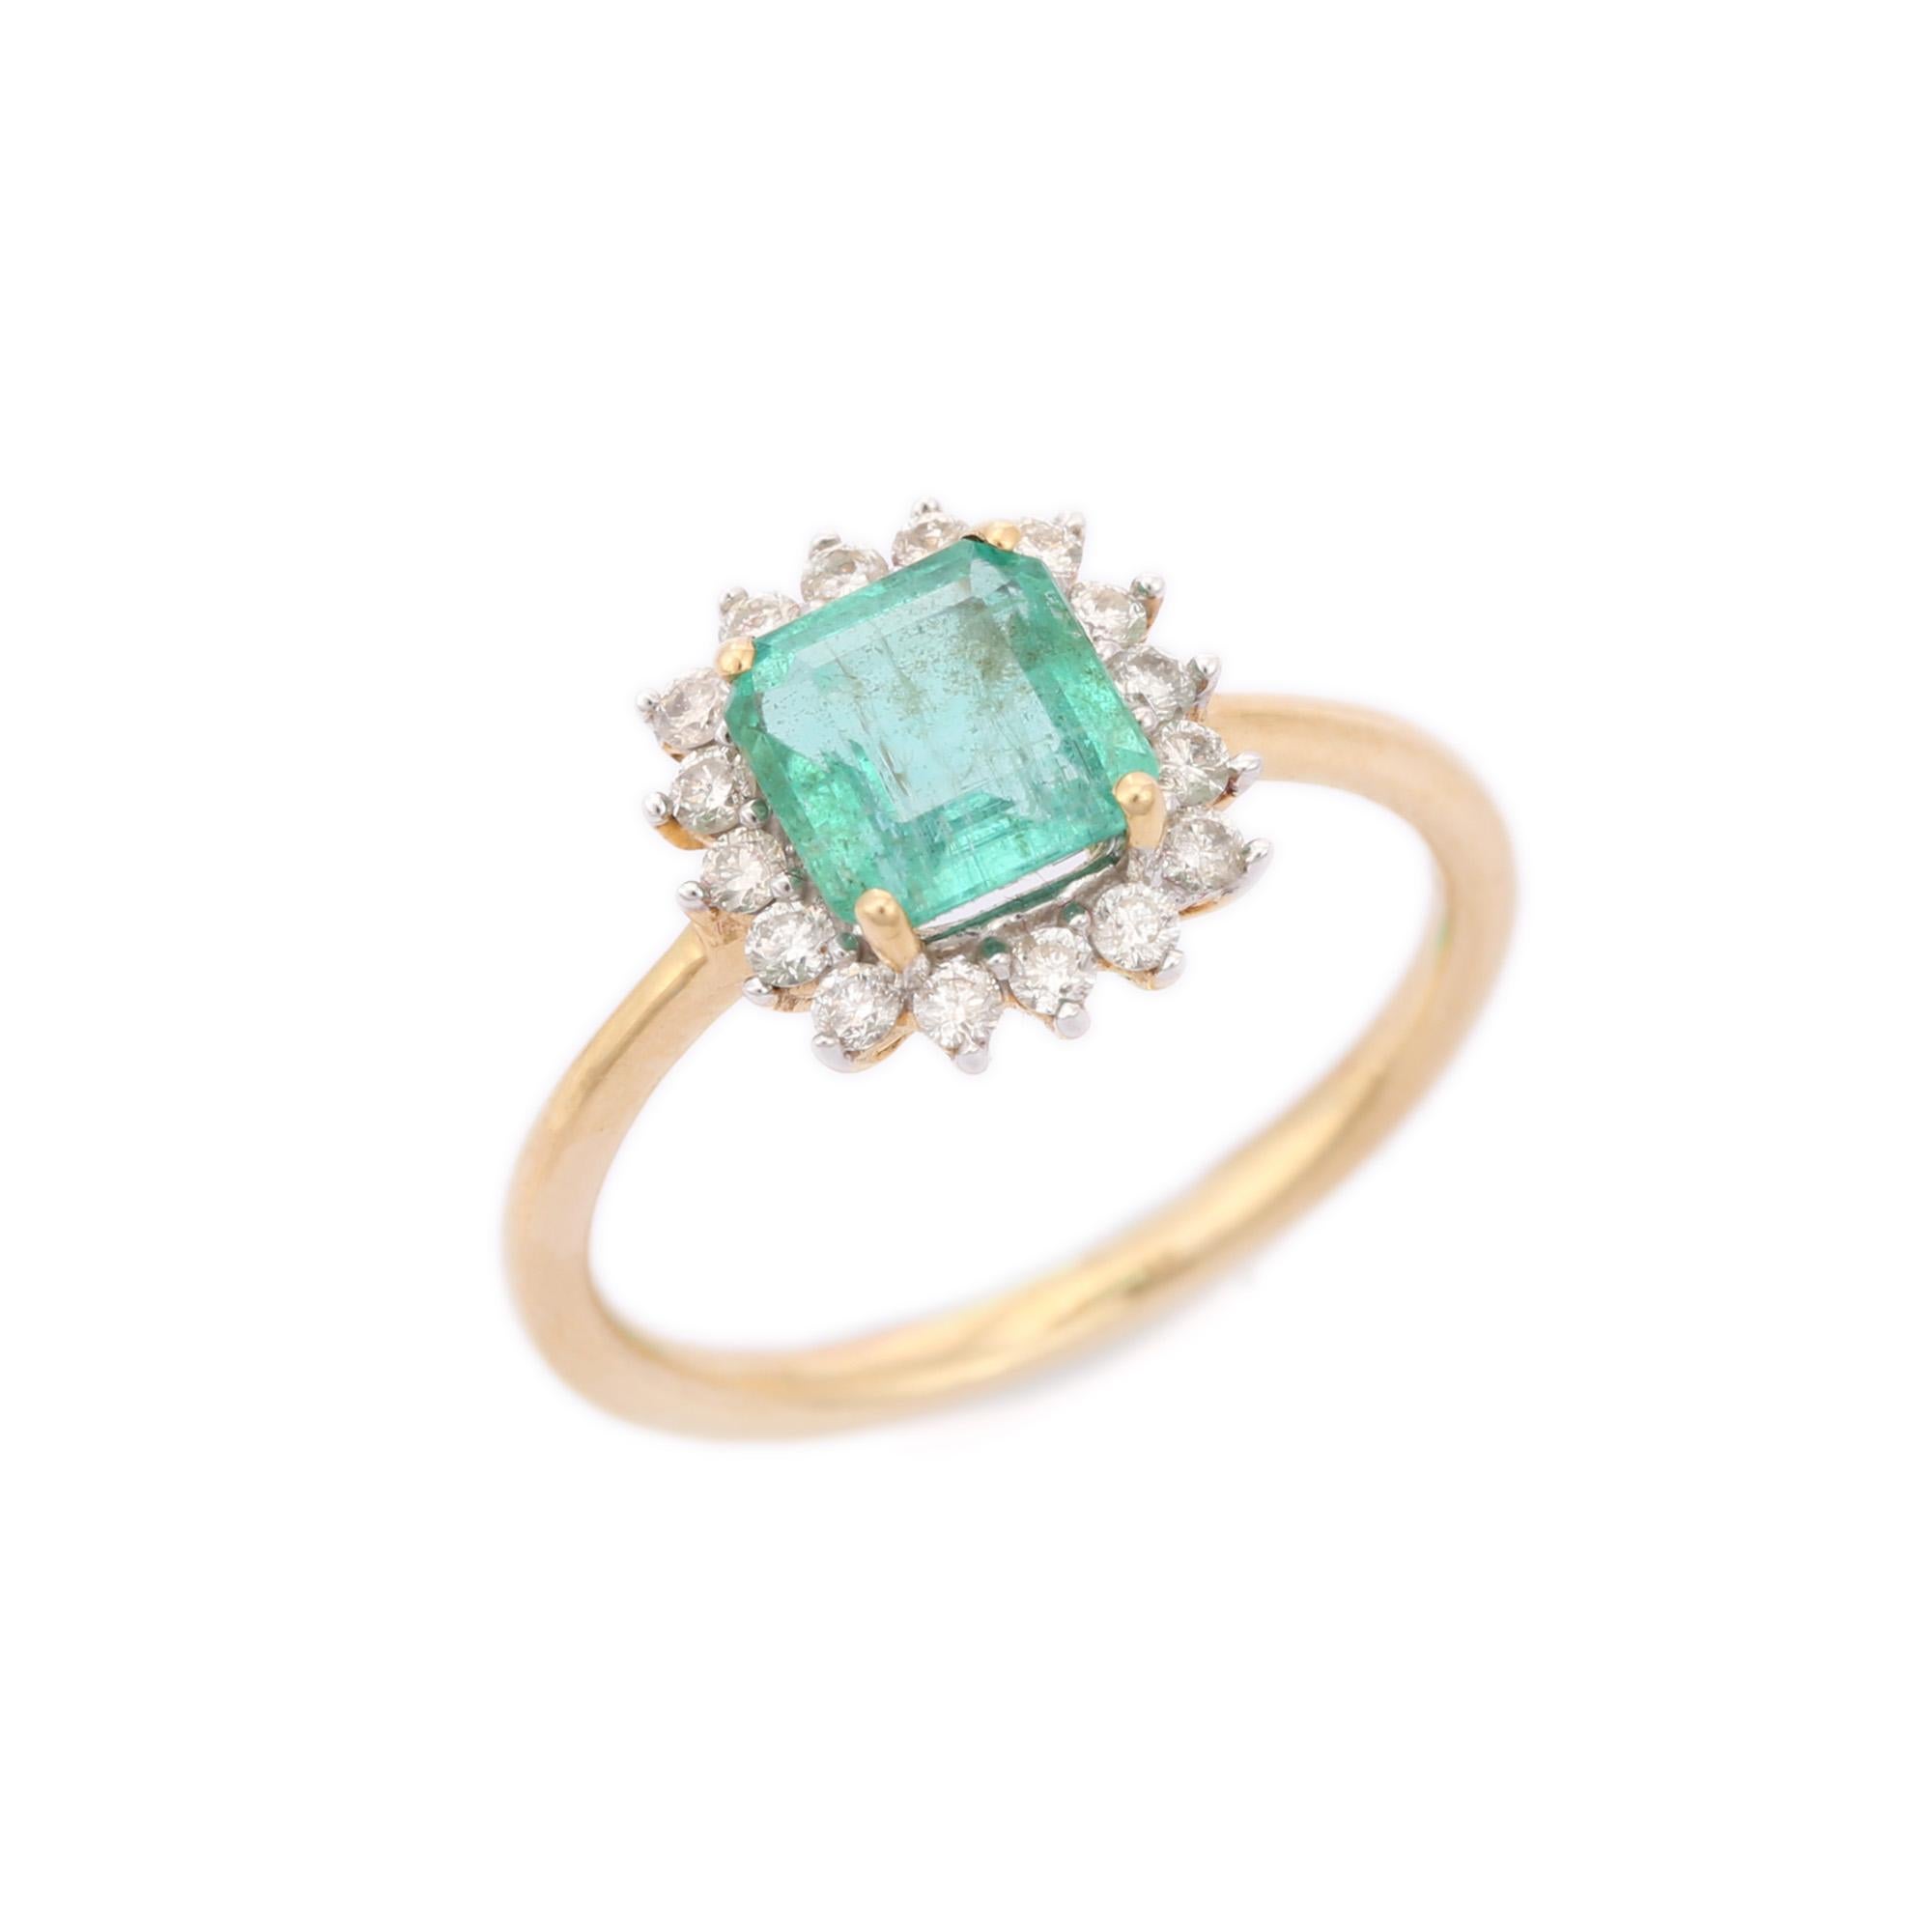 For Sale:  Designer Emerald and Diamond Bridal Ring in 18K Yellow Gold  7